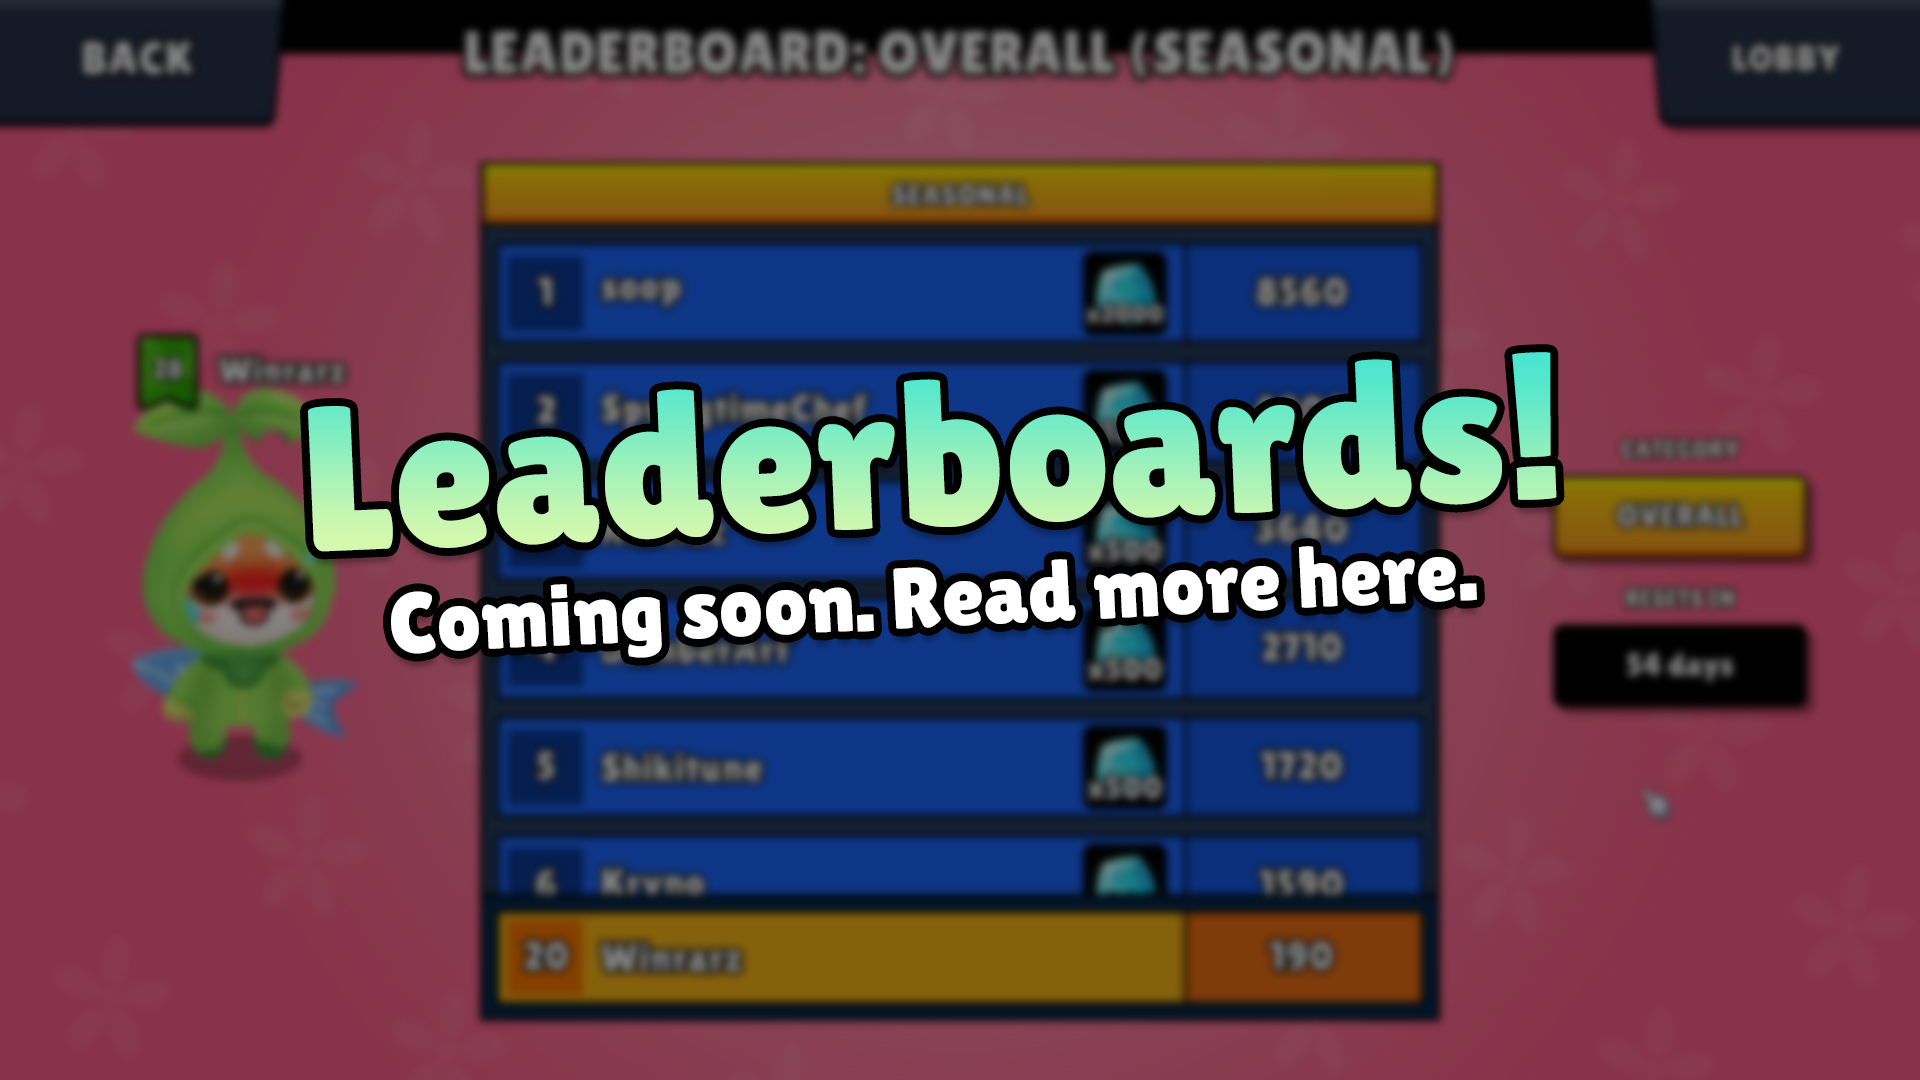 Leaderboards are coming to Bombergrounds: Battle Royale! Are you